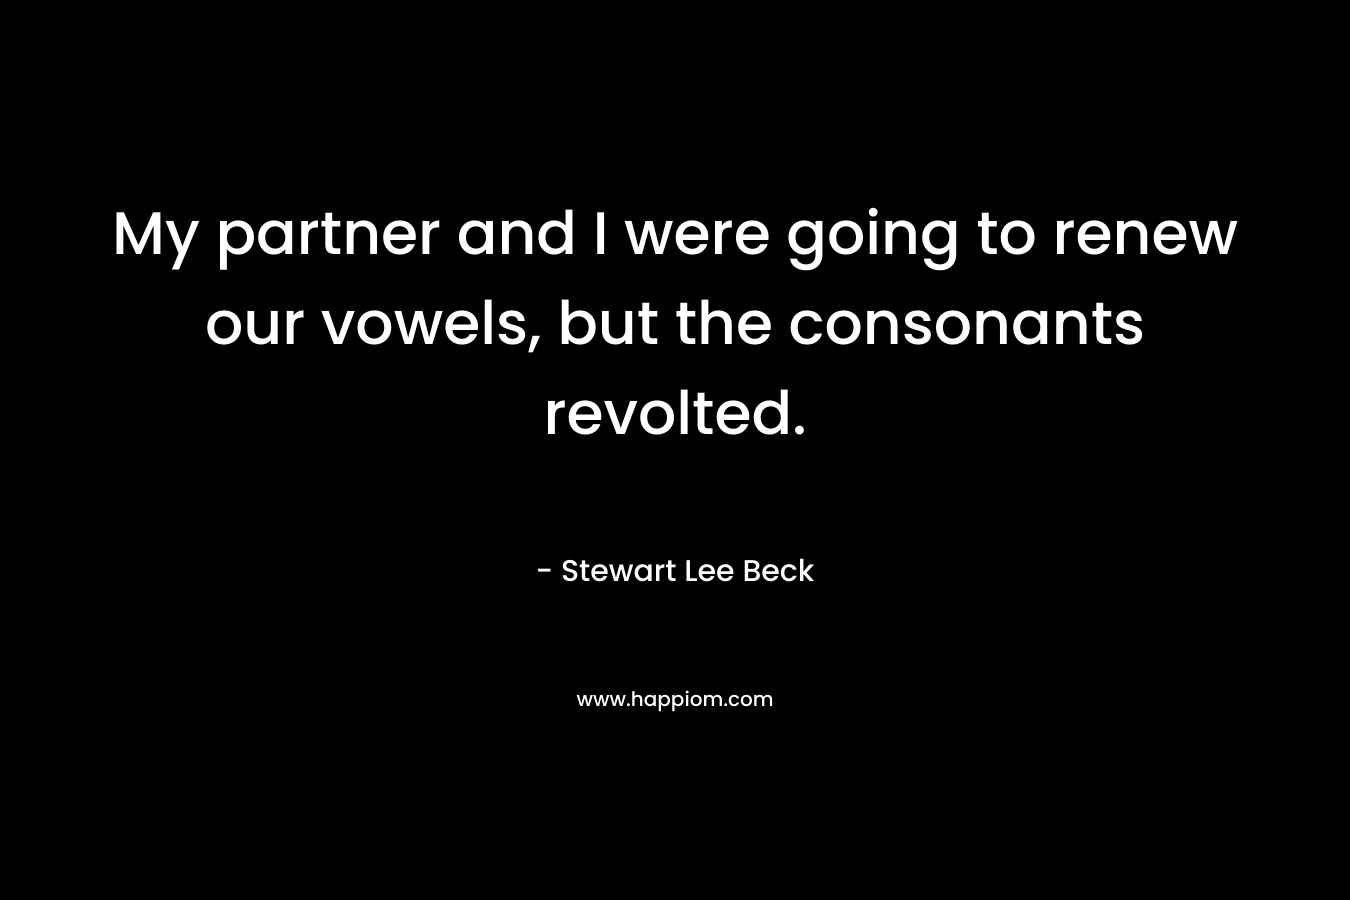 My partner and I were going to renew our vowels, but the consonants revolted. – Stewart Lee Beck